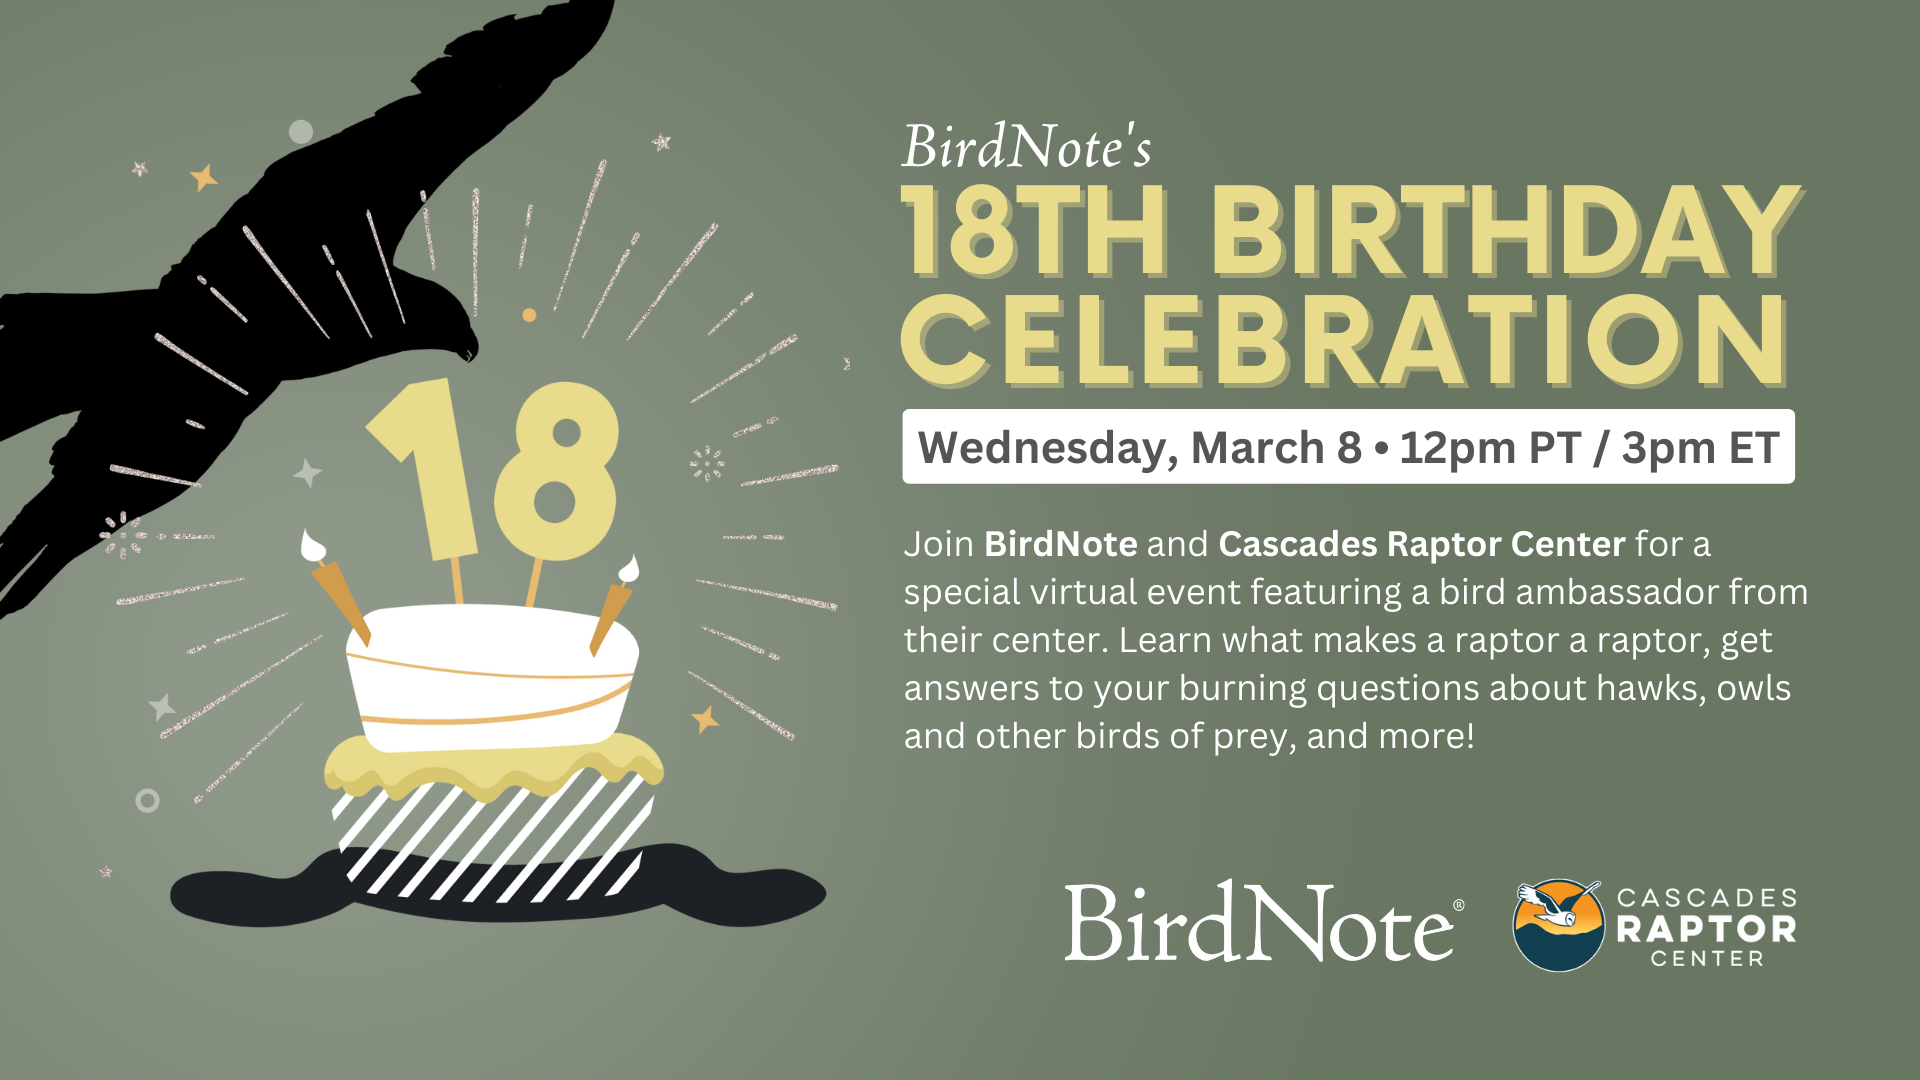 A graphic describing upcoming virtual bird event with Cascades Raptor Center on March 8 at 12 pm PT